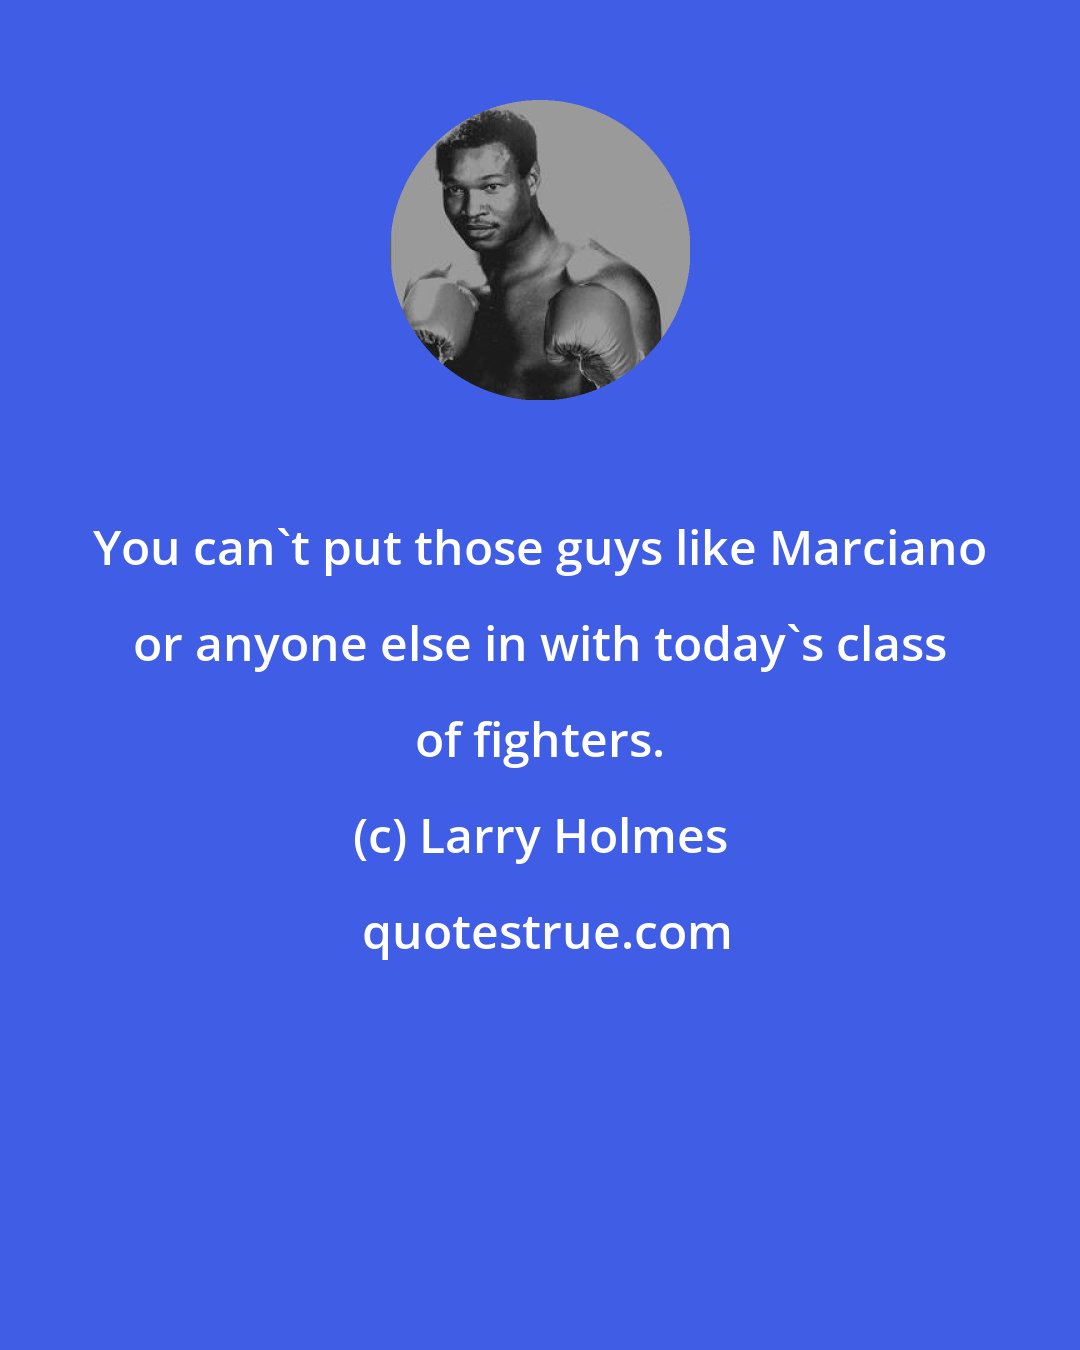 Larry Holmes: You can't put those guys like Marciano or anyone else in with today's class of fighters.